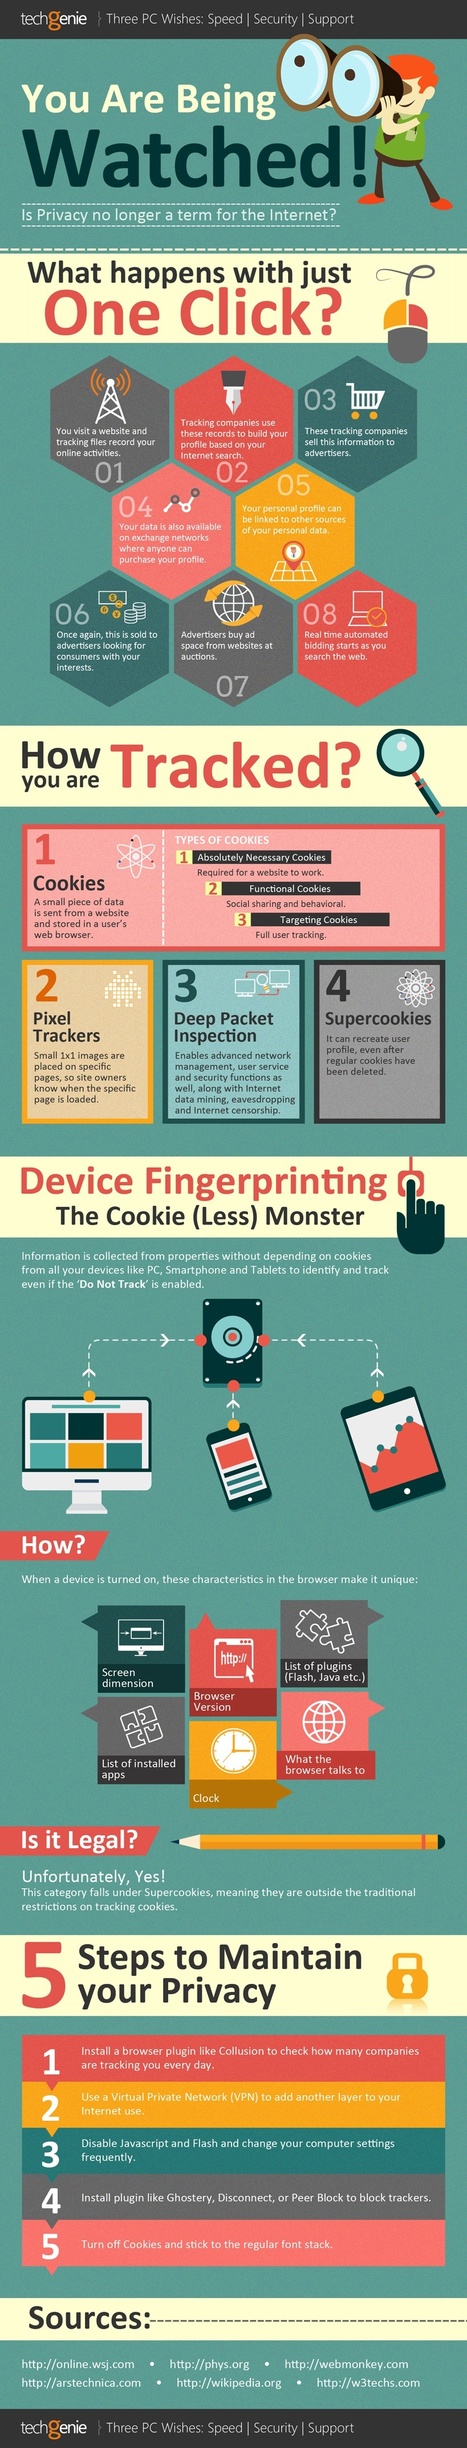 You’re Being Watched Online [Infographic] | Web 2.0 for juandoming | Scoop.it